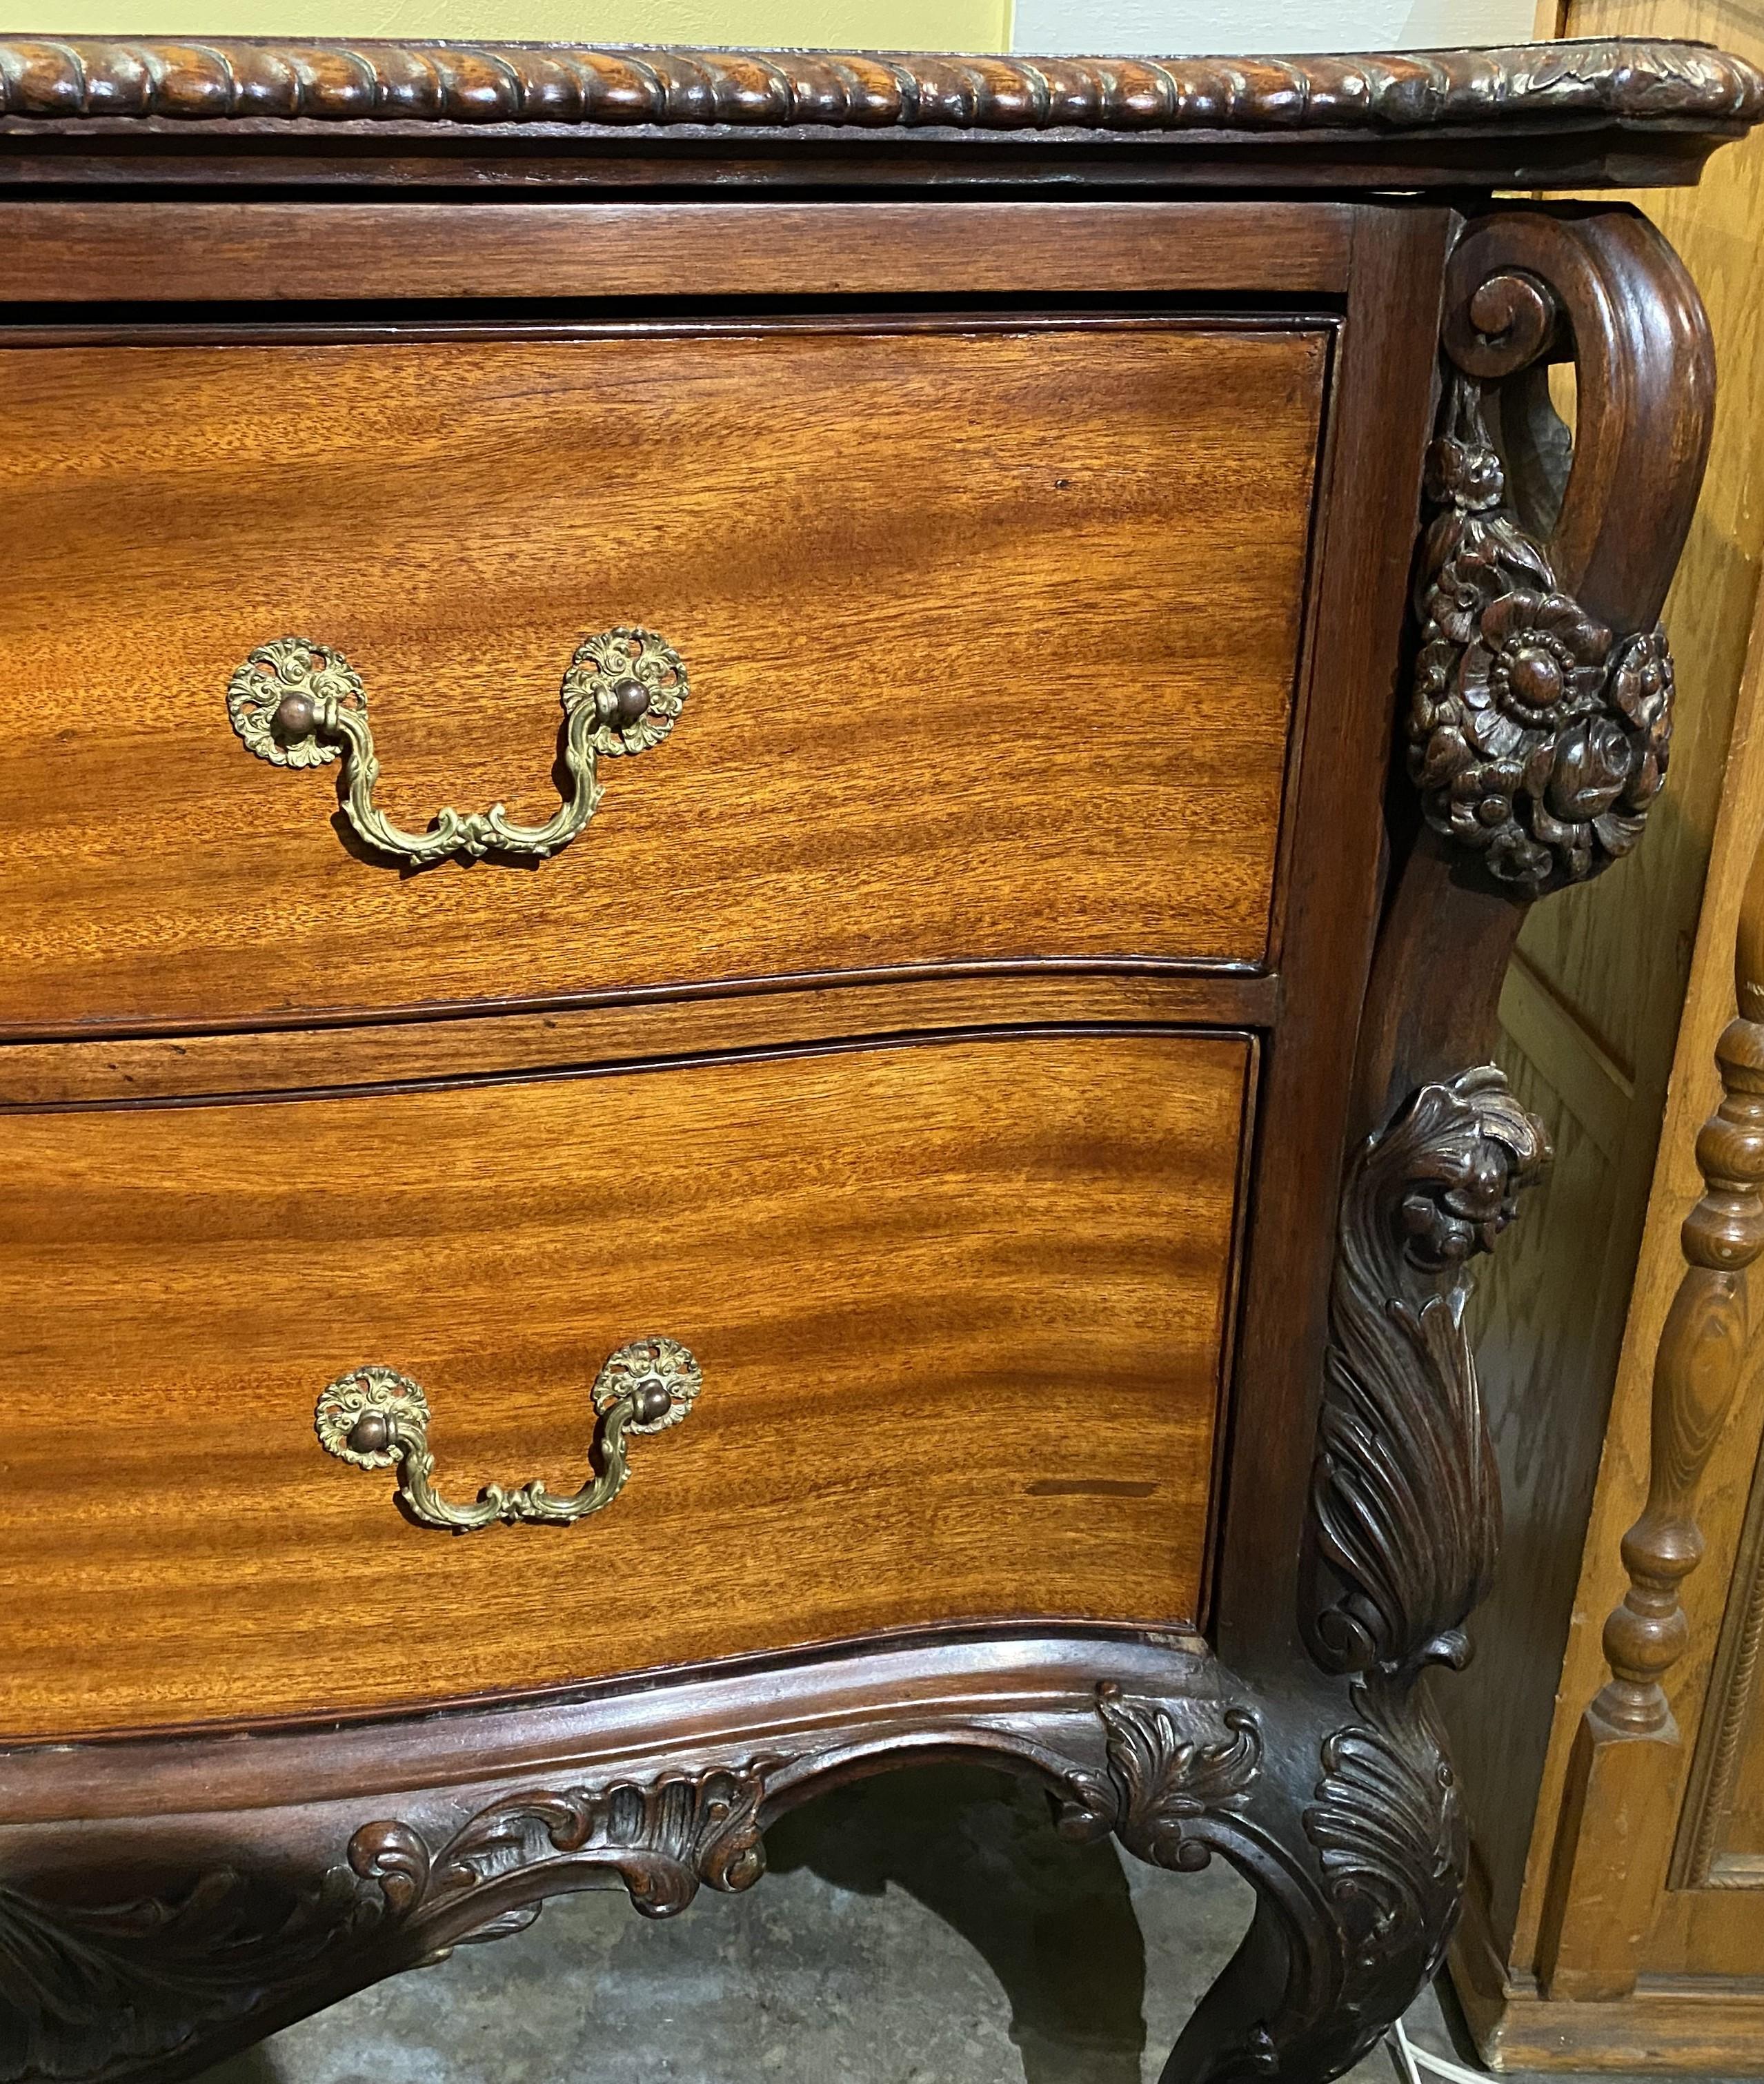 An exceptional 19th century English commode or chest with beautifully detailed foliate and scrollwork, its shaped conforming top with a gadrooned edge and extended canted corners surmounting a slight bow front case with two long drawers, each